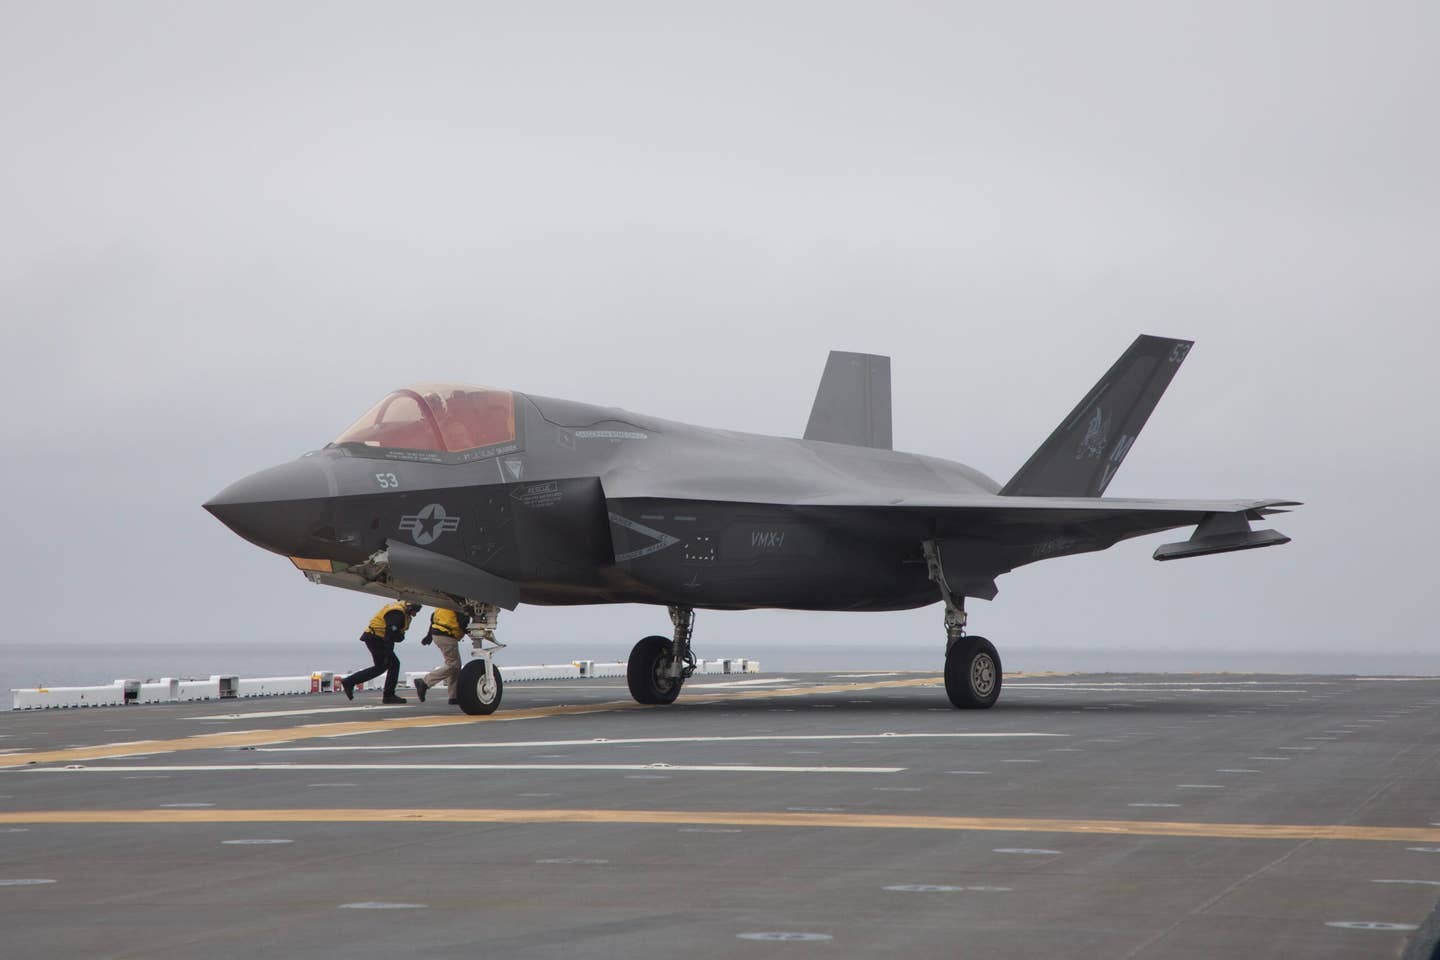 VMX-1 F-35B aboard an amphibious assault ship during an exercise. (Author's image)